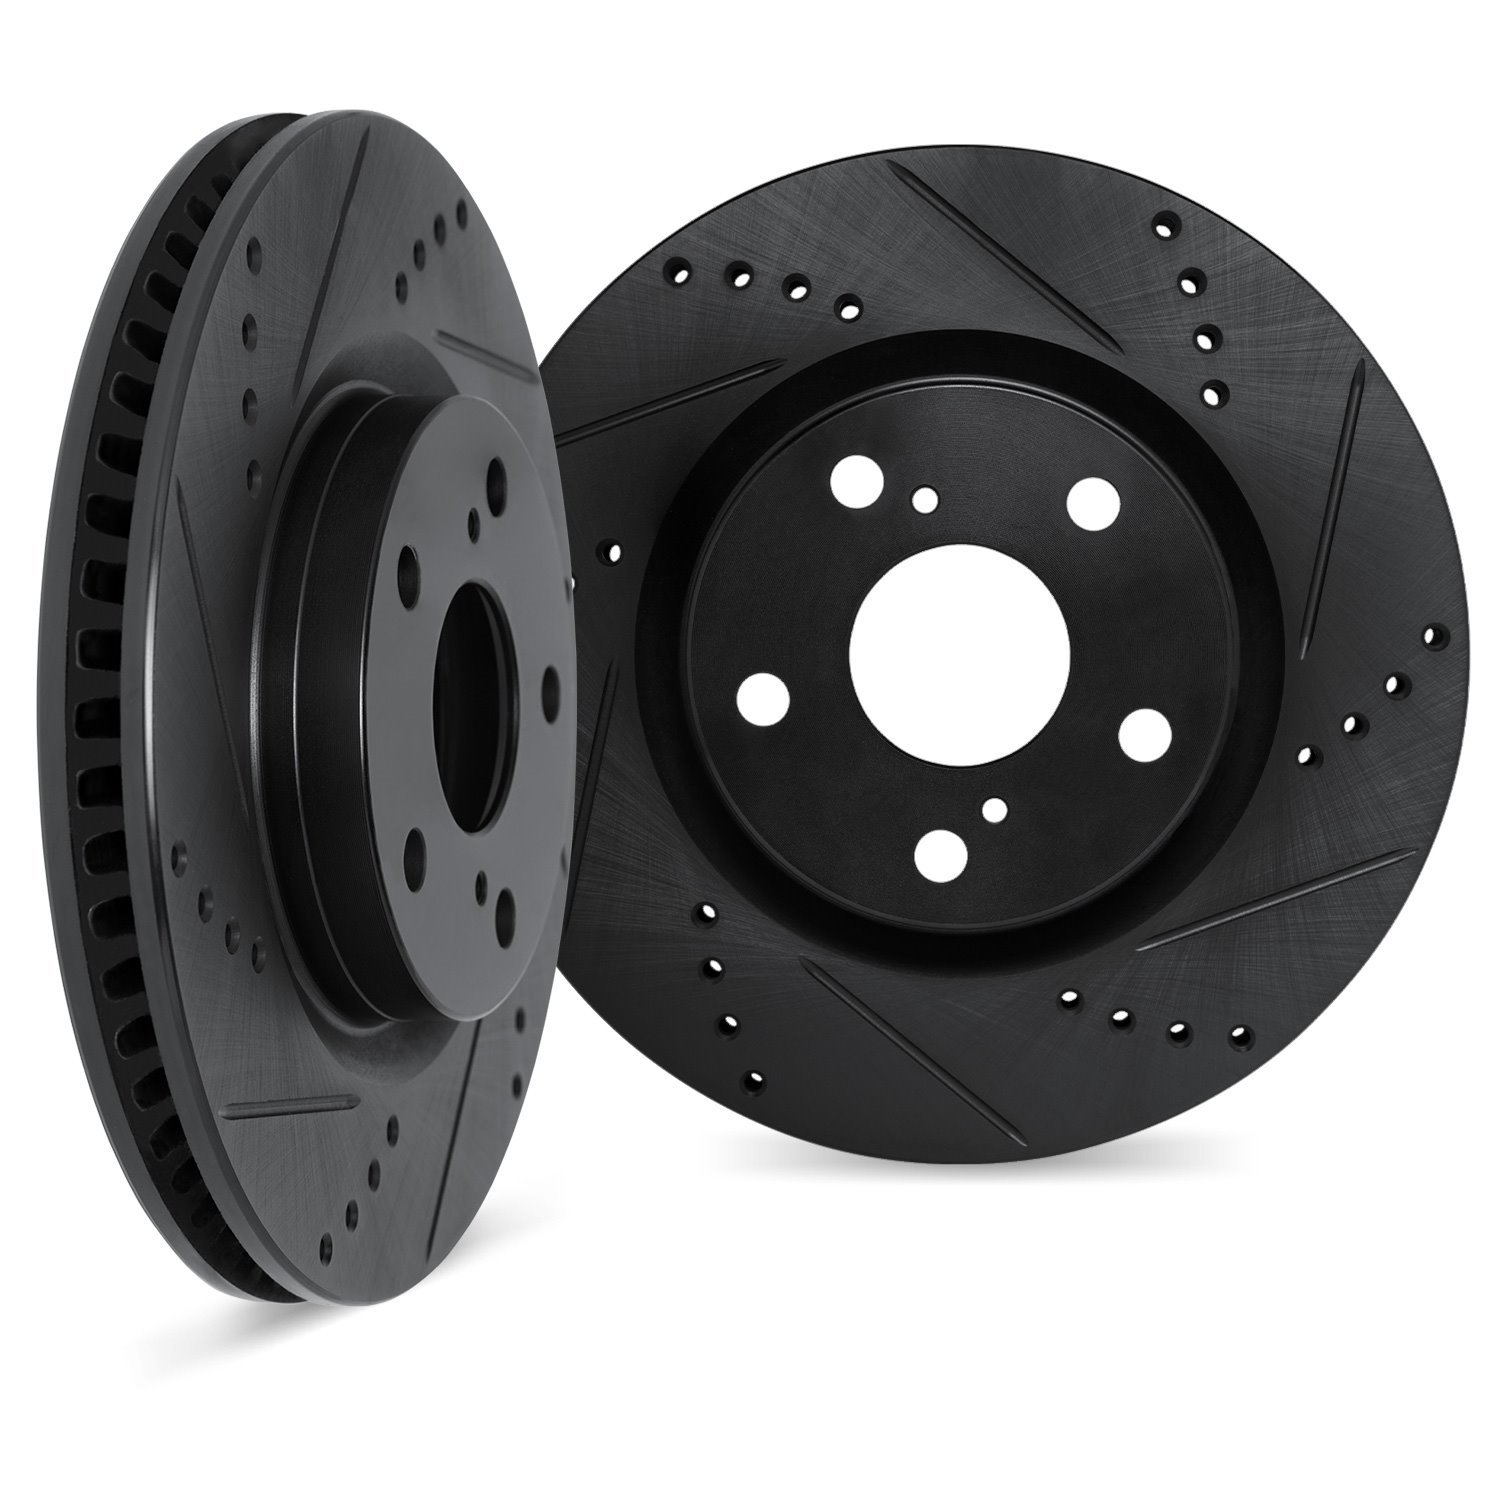 8002-46047 Drilled/Slotted Brake Rotors [Black], Fits Select GM, Position: Rear